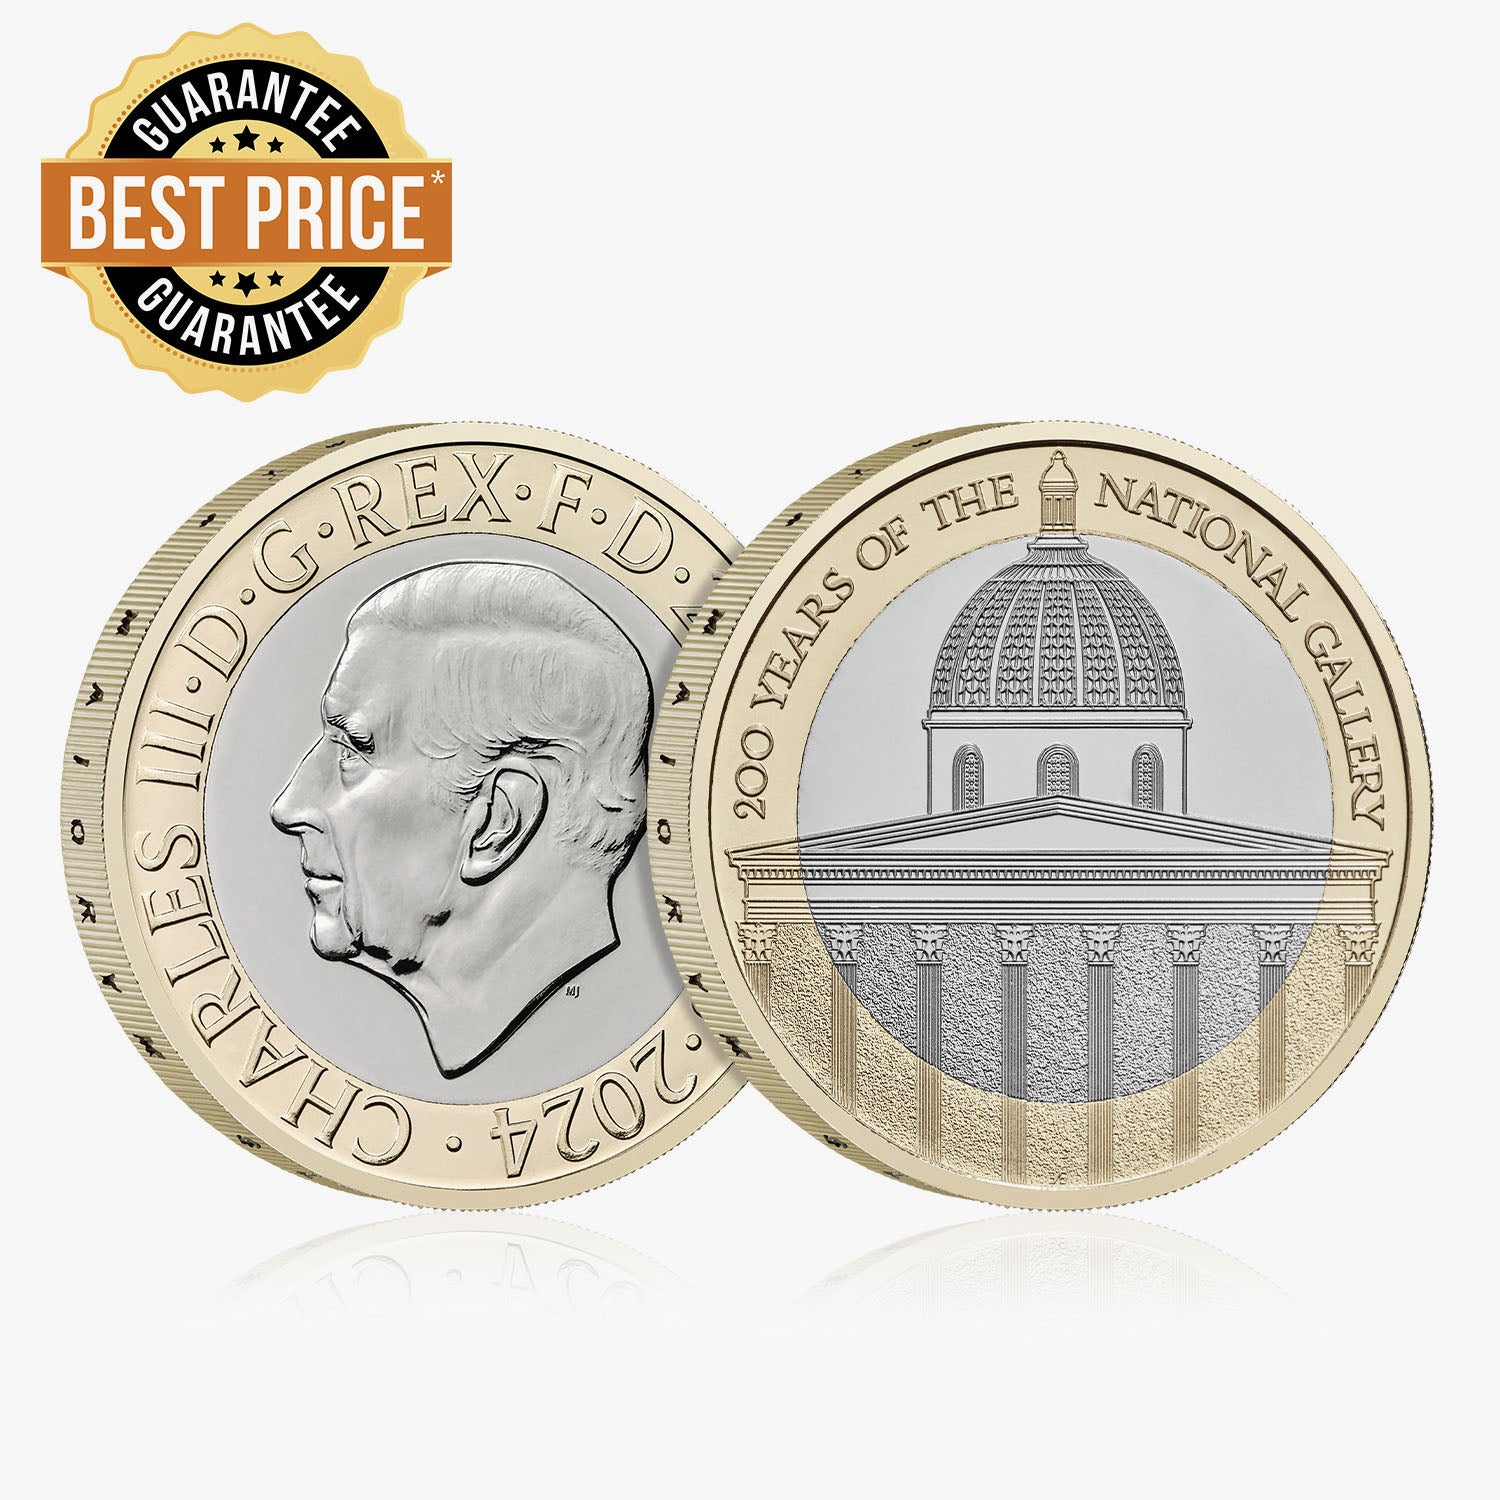 200 Years of The National Gallery UK £2 Brilliant Uncirculated coin